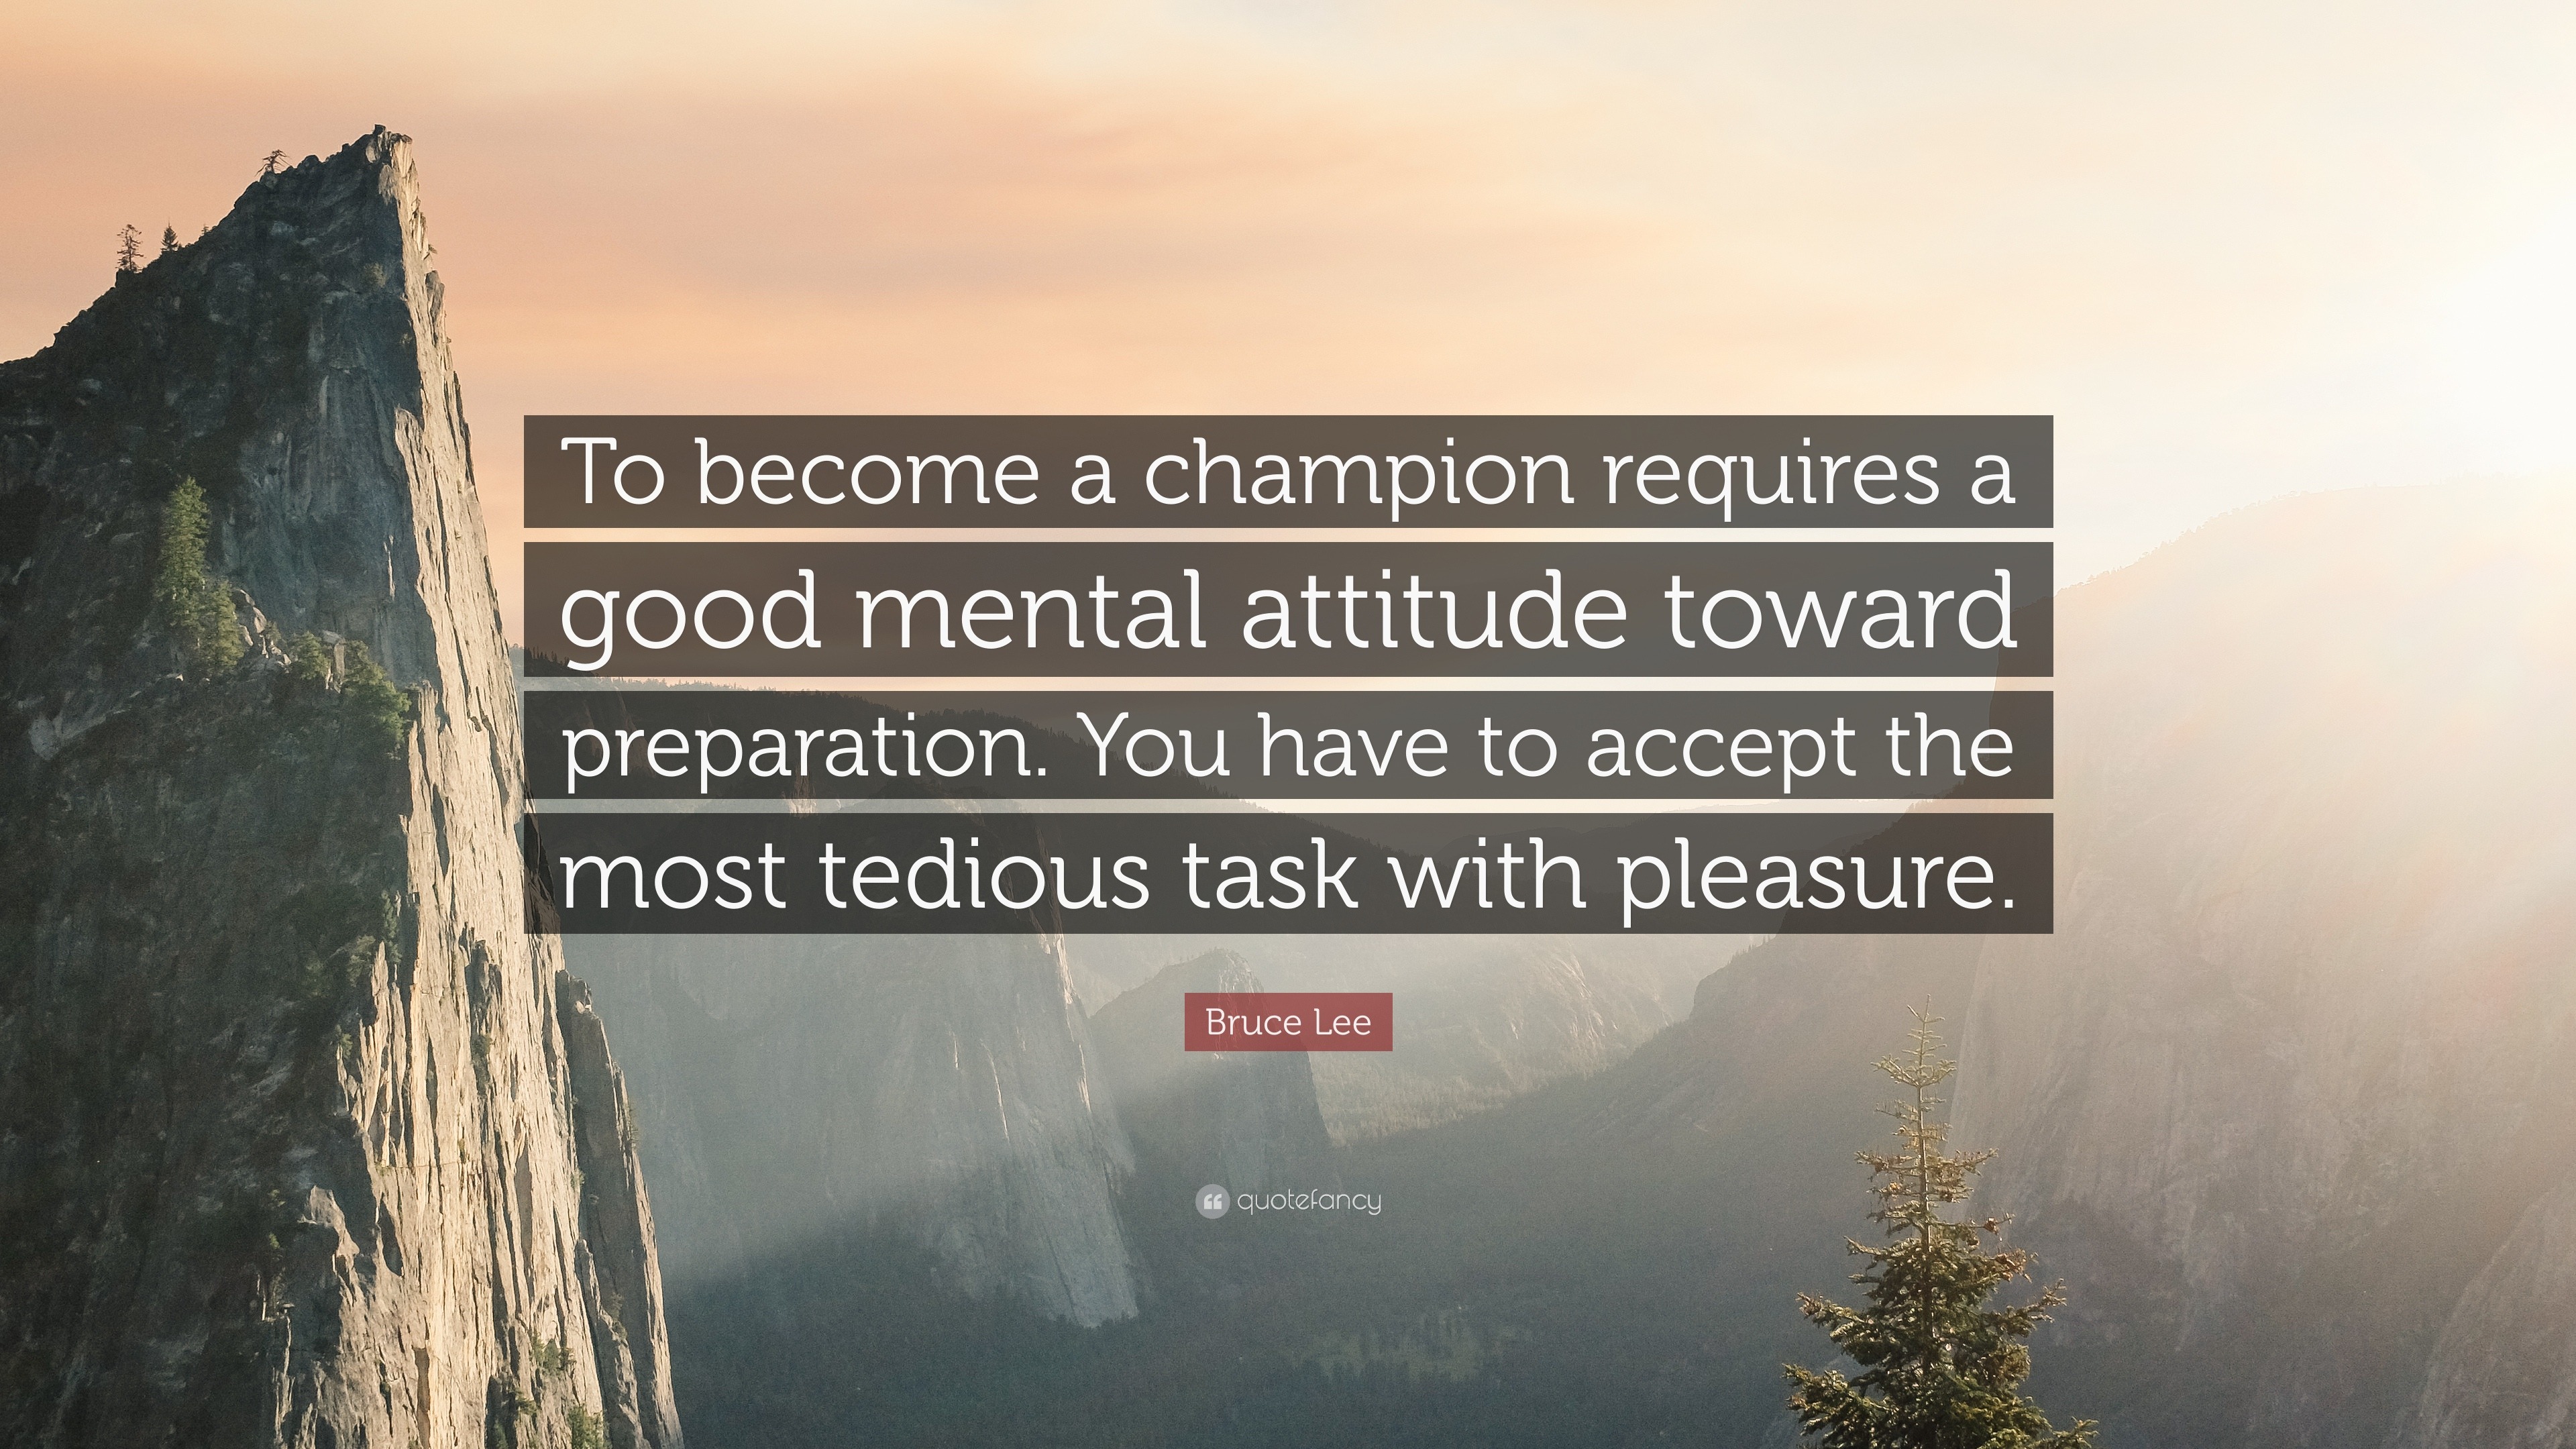 Bruce Lee Quote: “To become a champion requires a good attitude toward preparation. You to accept the most tedious task with p...”